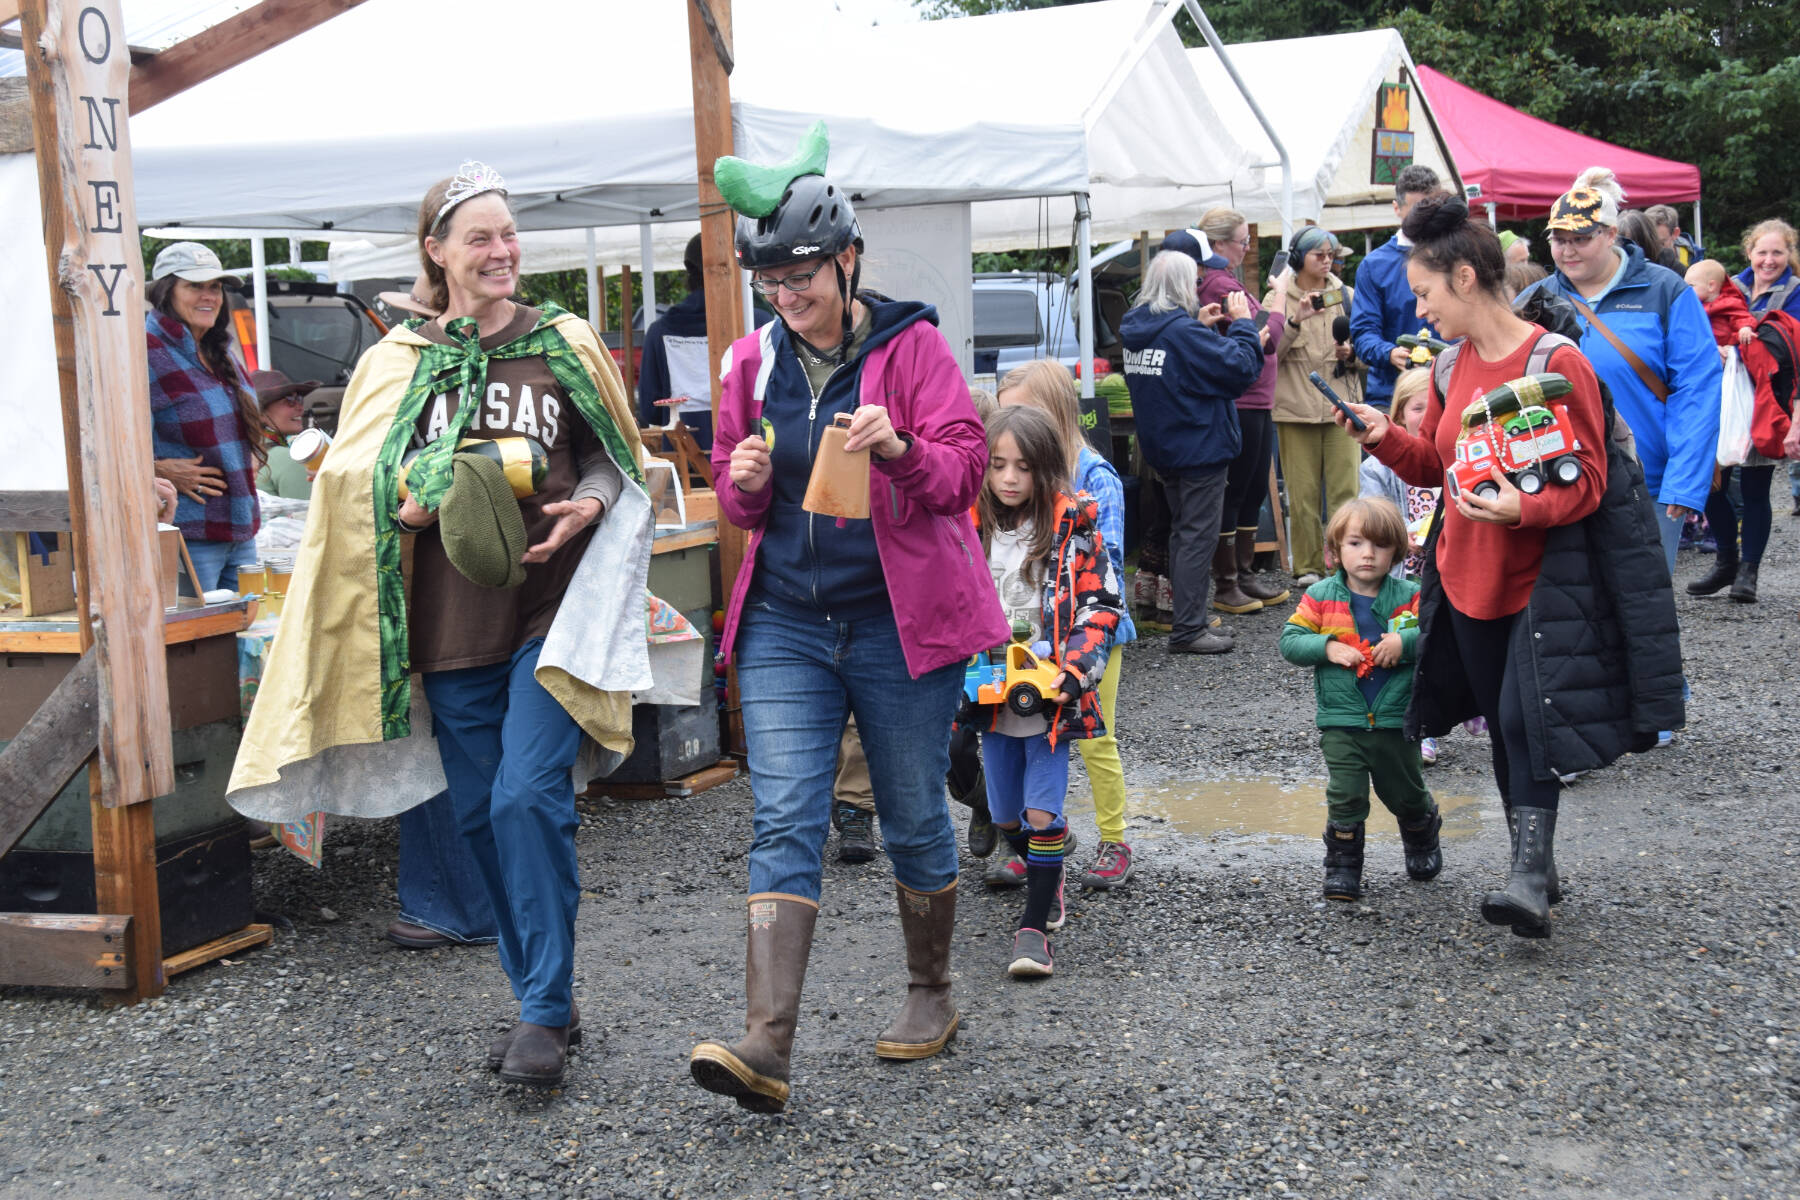 Newly-crowned Zucchini Queenie Jen Castellani, front left, leads the parade back to the race tent at the Homer Farmers Market Zucchini Festival on Saturday, Aug. 26, 2023 in Homer, Alaska. (Delcenia Cosman/Homer News)